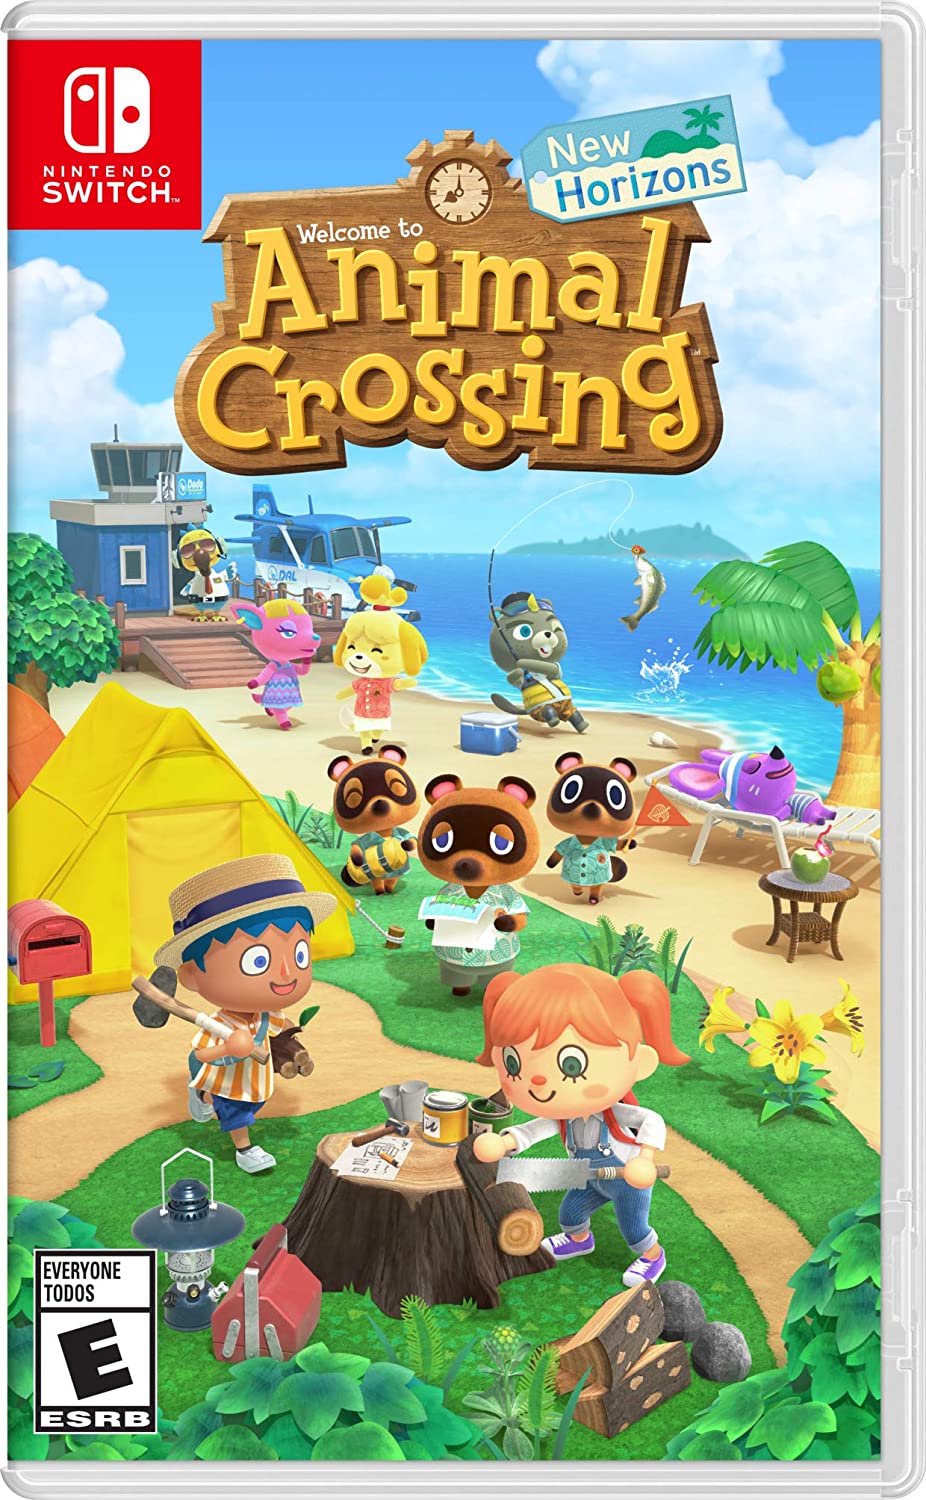 ANIMAL CROSSING SWITCH - Easy Games